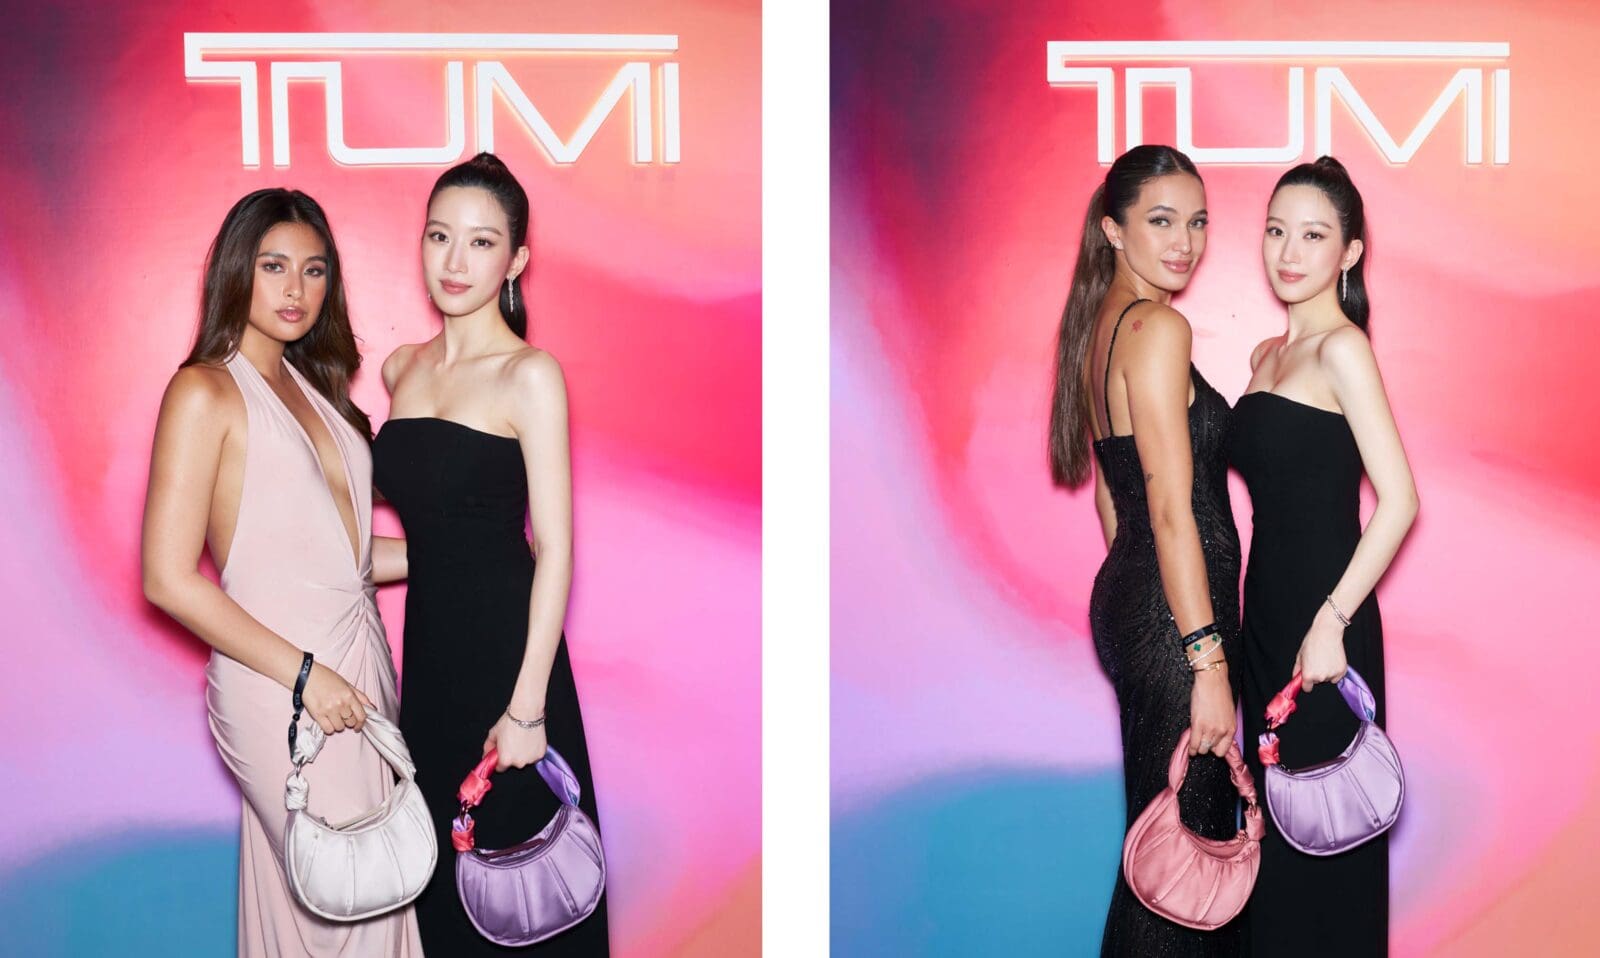 Gabbi Garcia and Sarah Lahbati with Mun Ka-Young against a pink and blue gradient of TUMI photo wall